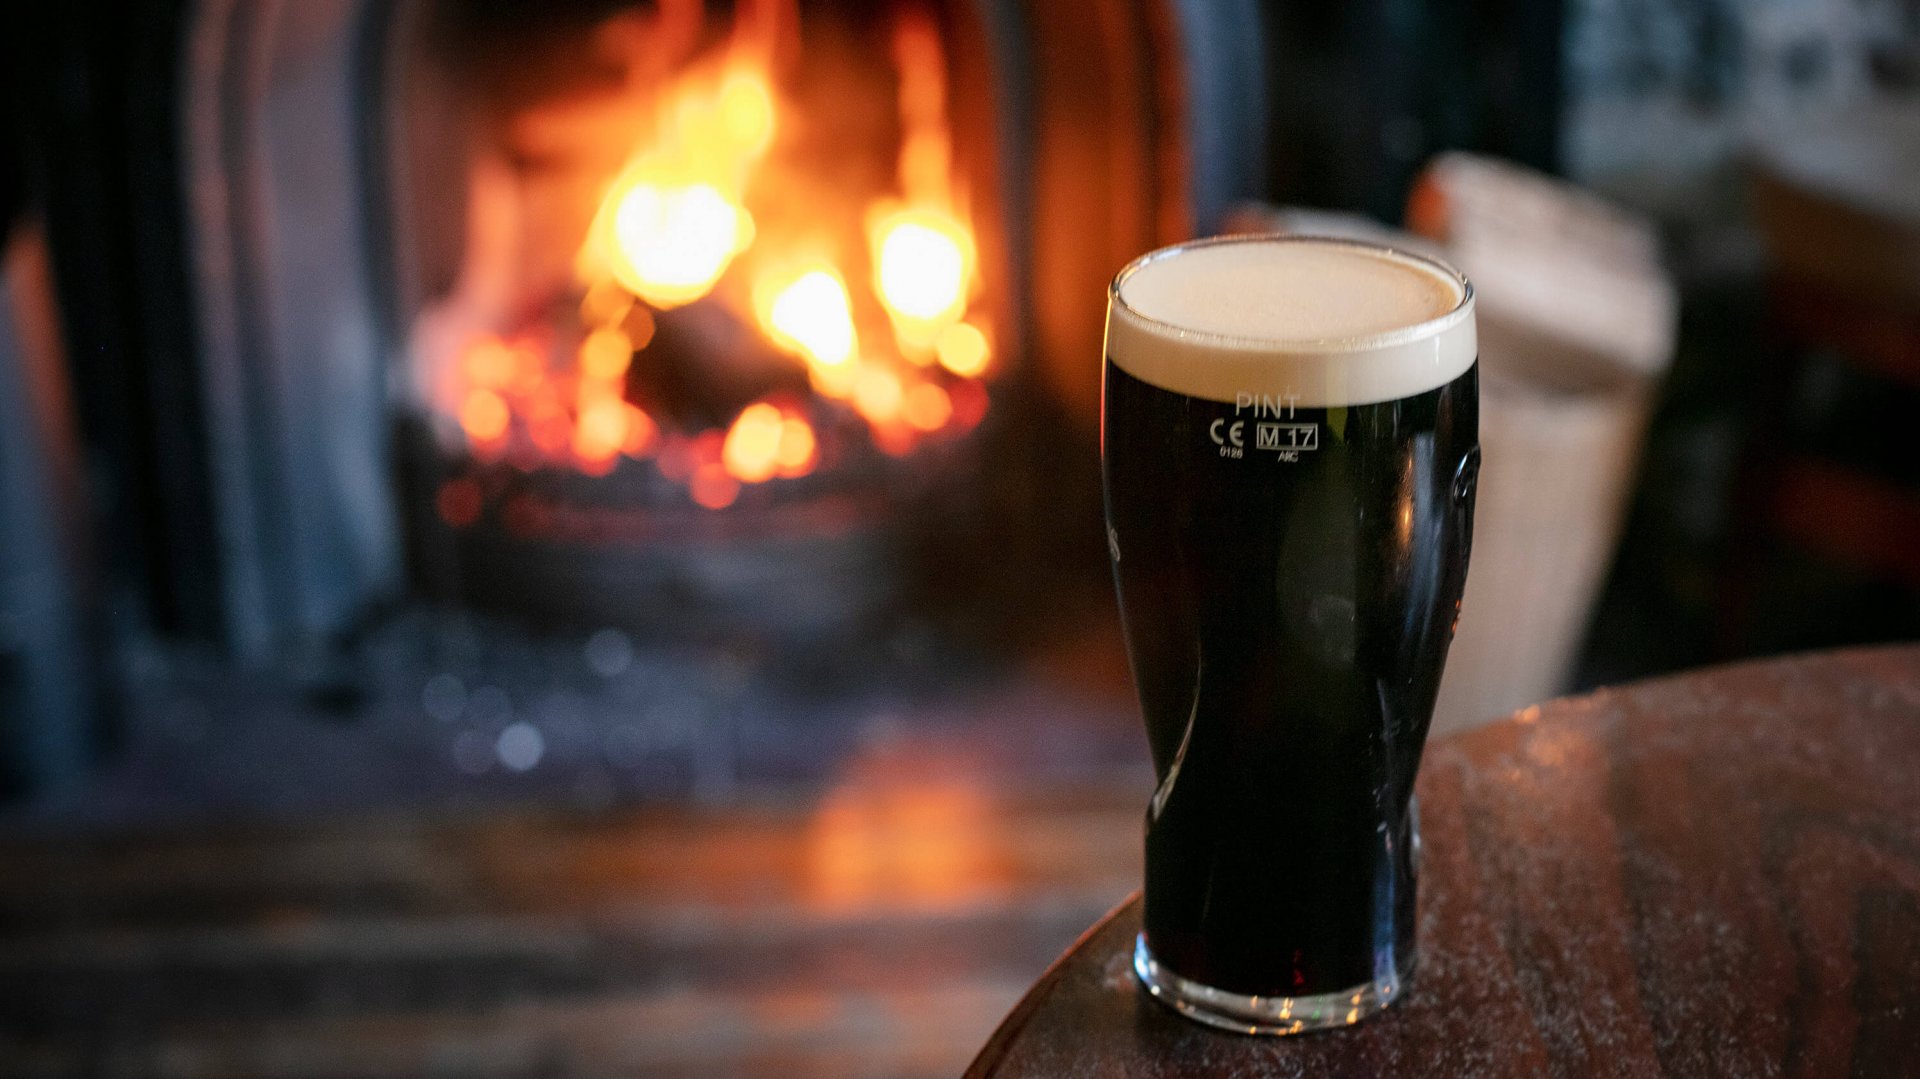 A pint of Guinness sitting on a table in front of a lighting fire